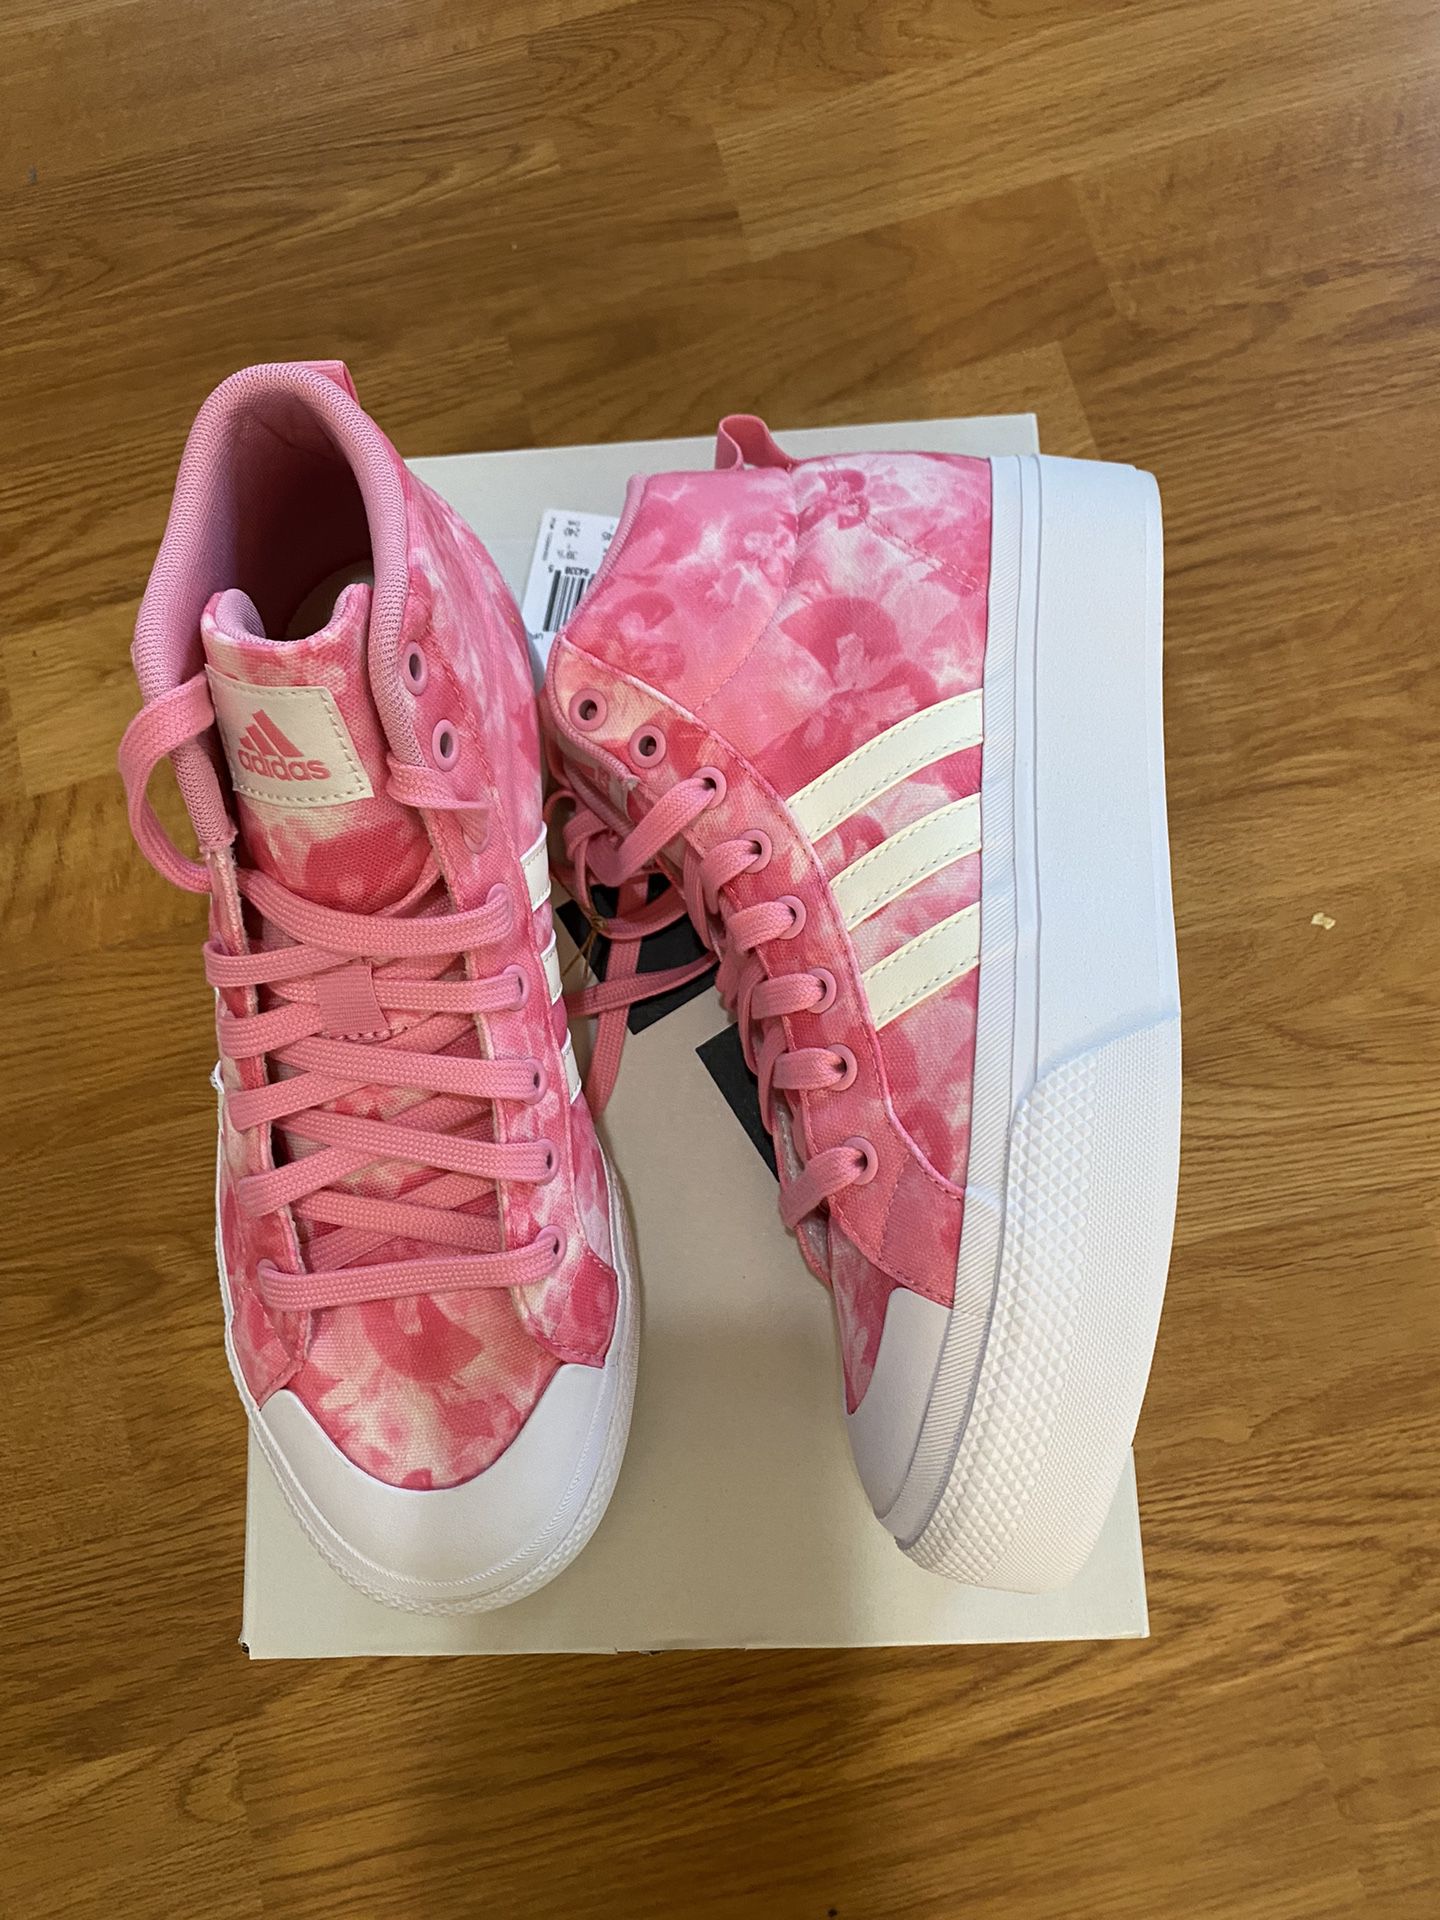 New Women’s Adidas Sz 7, 7.5, 8 Shoes Pink 